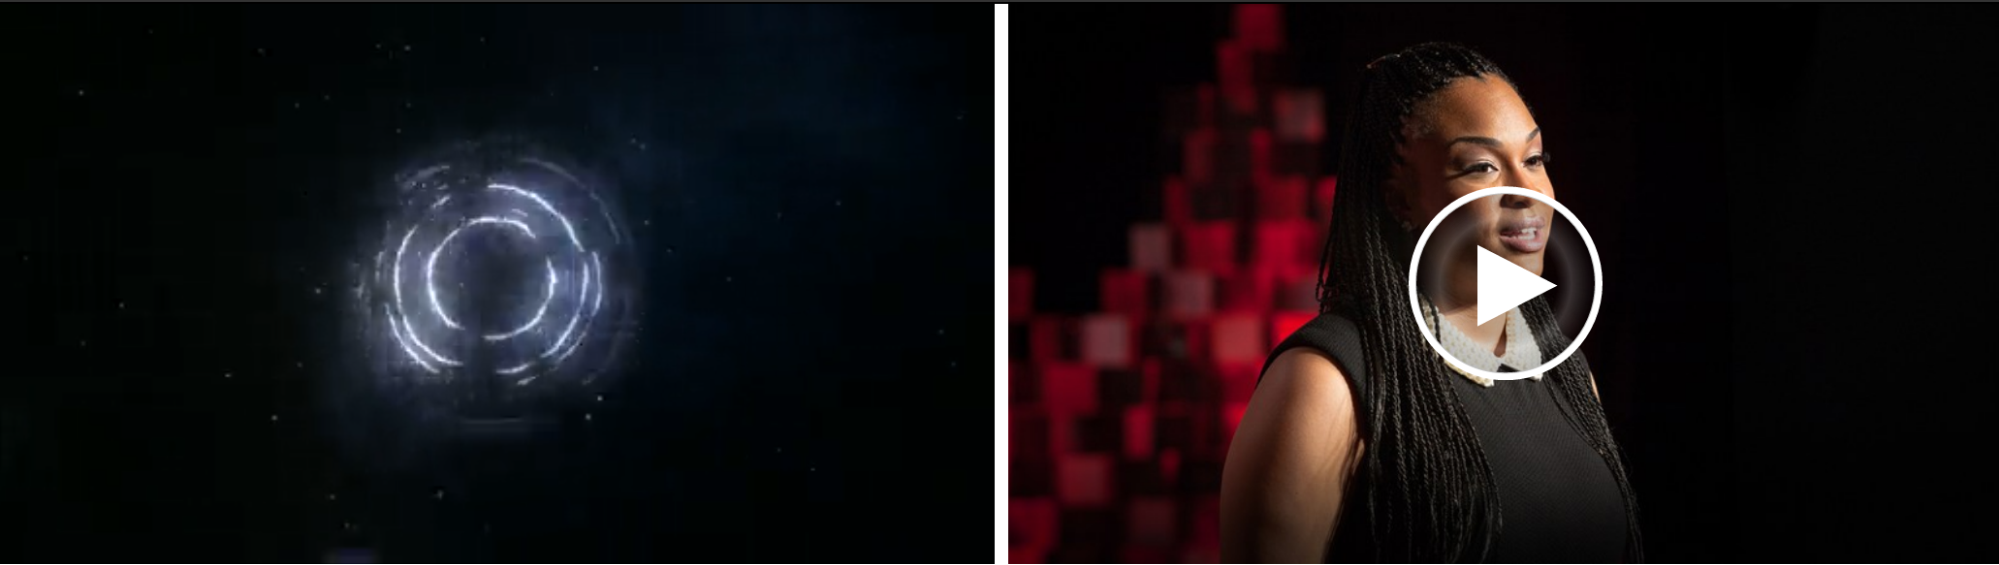 The ripple effect in the intro video on TED (left) mirrored in the play button interaction (right).